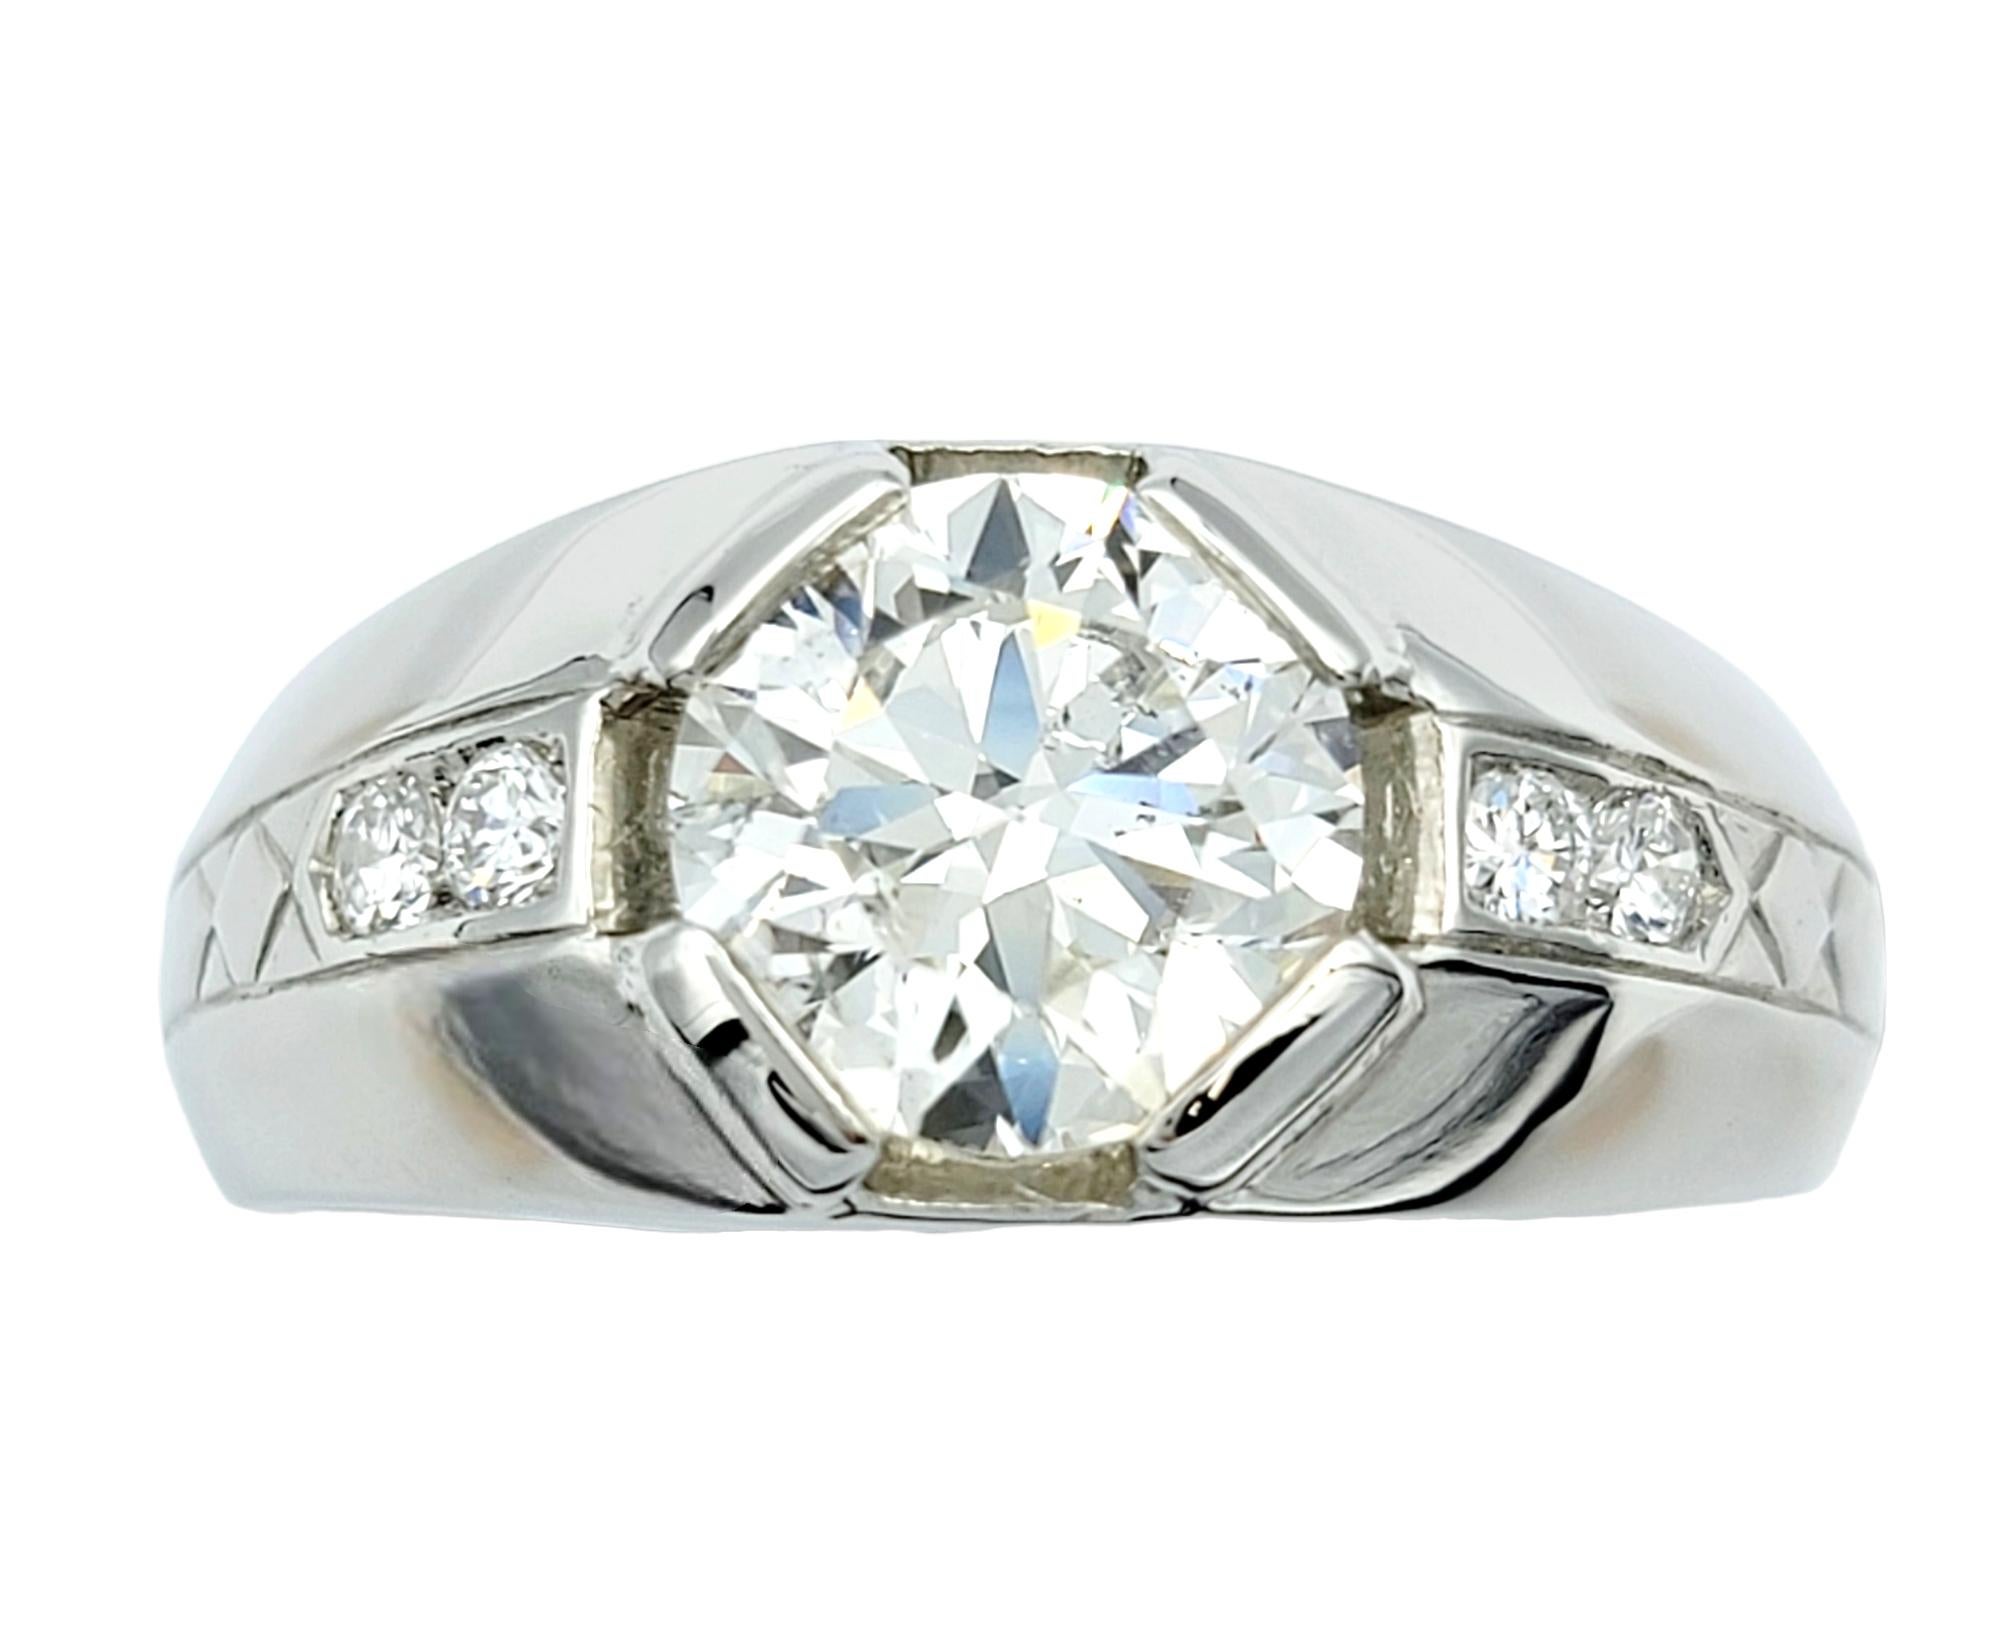 Ring size: 9.75

This brilliant 1960's platinum signet men's ring is a masterpiece of elegance and refinement, designed to make a bold statement. At its heart, an exquisite 2.15 carat early modern brilliant cut diamond captures the eye, held